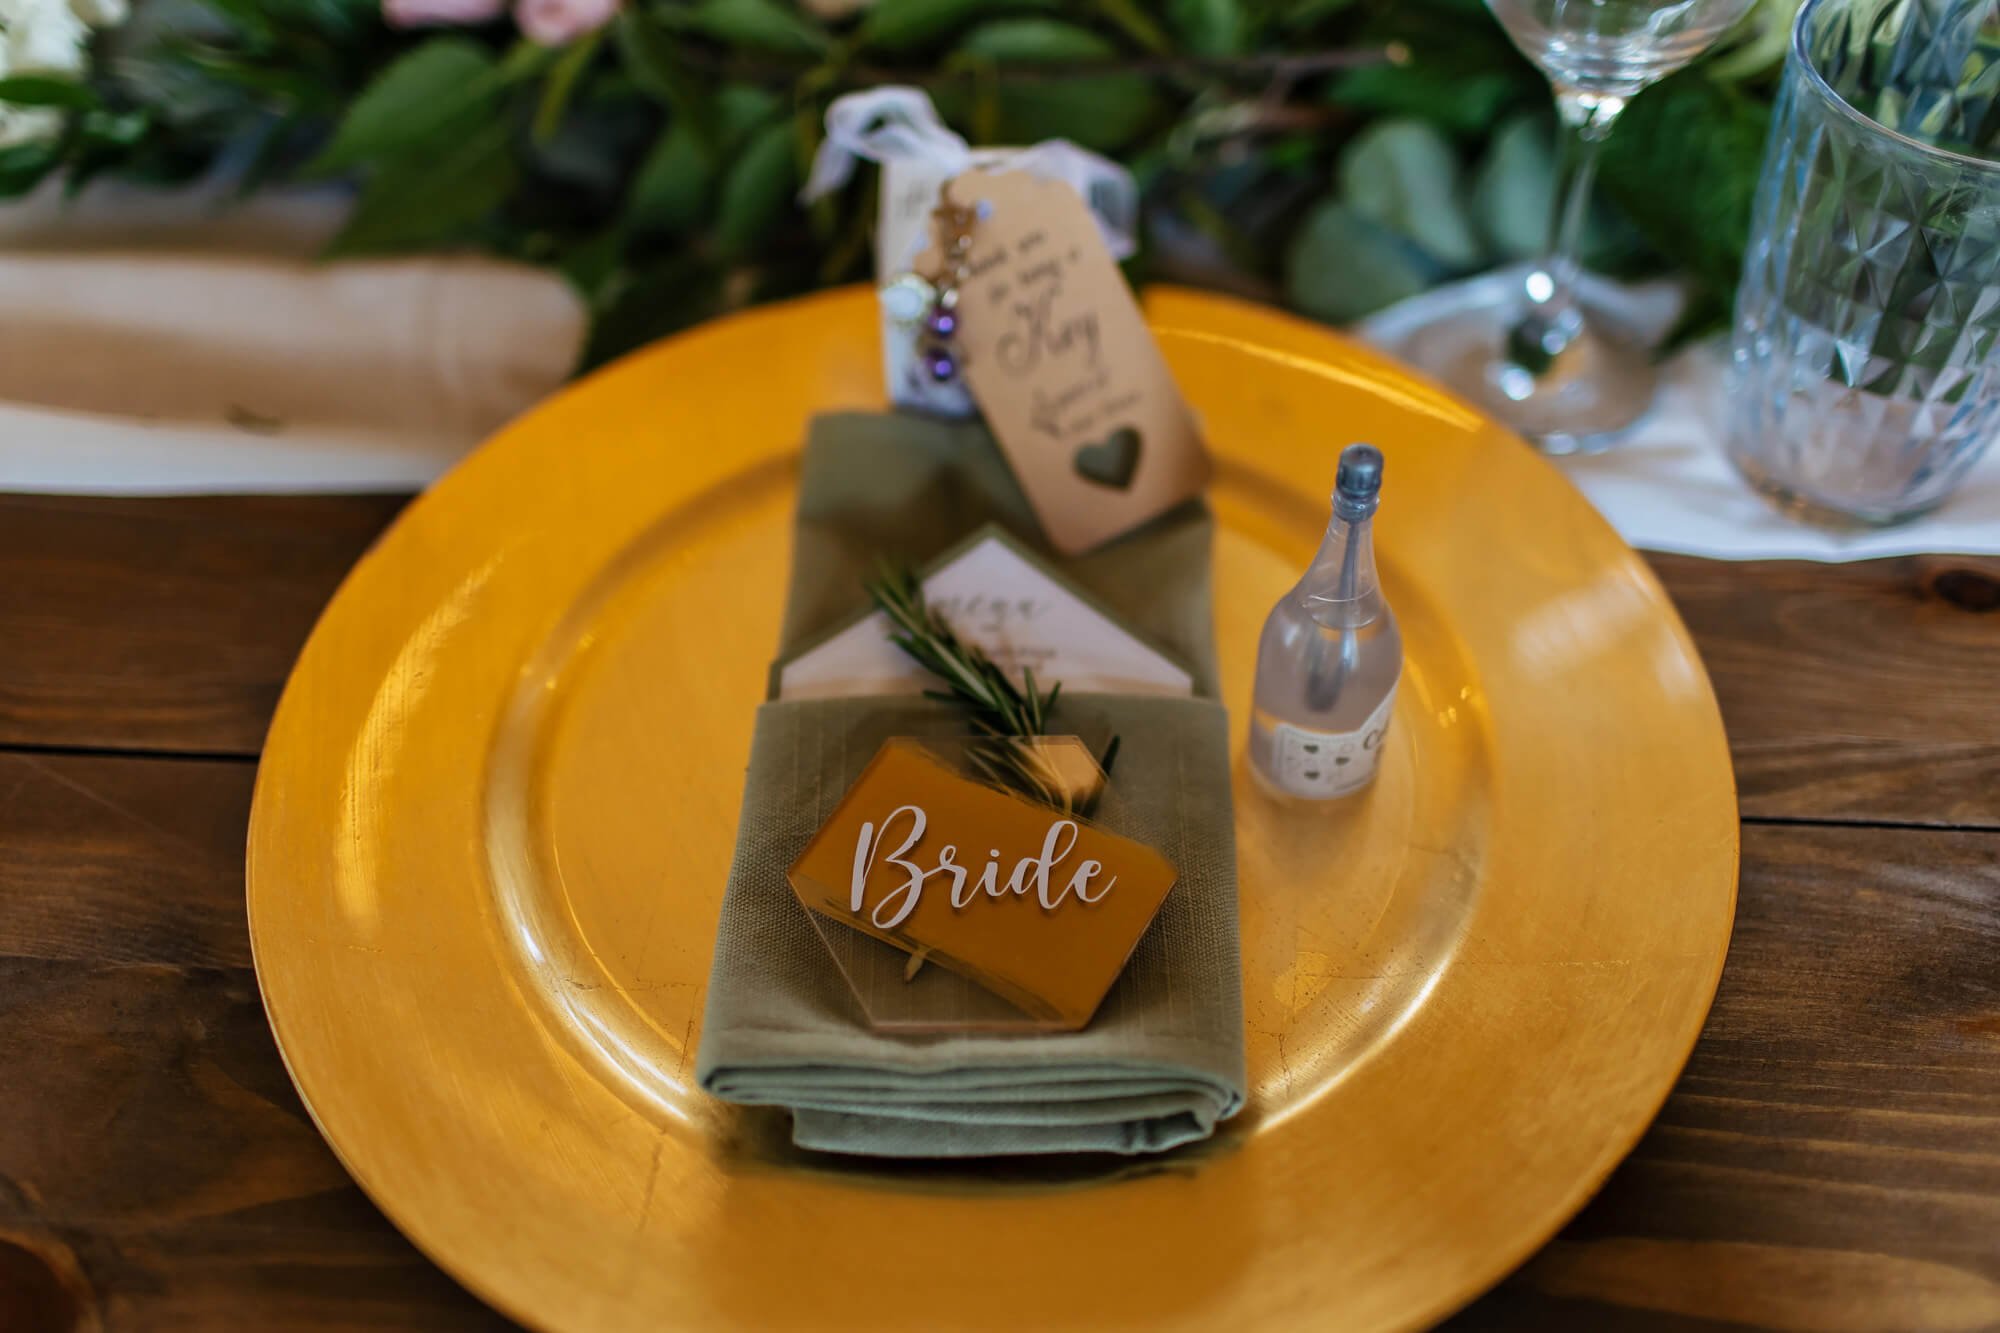 Bride table setting for her wedding